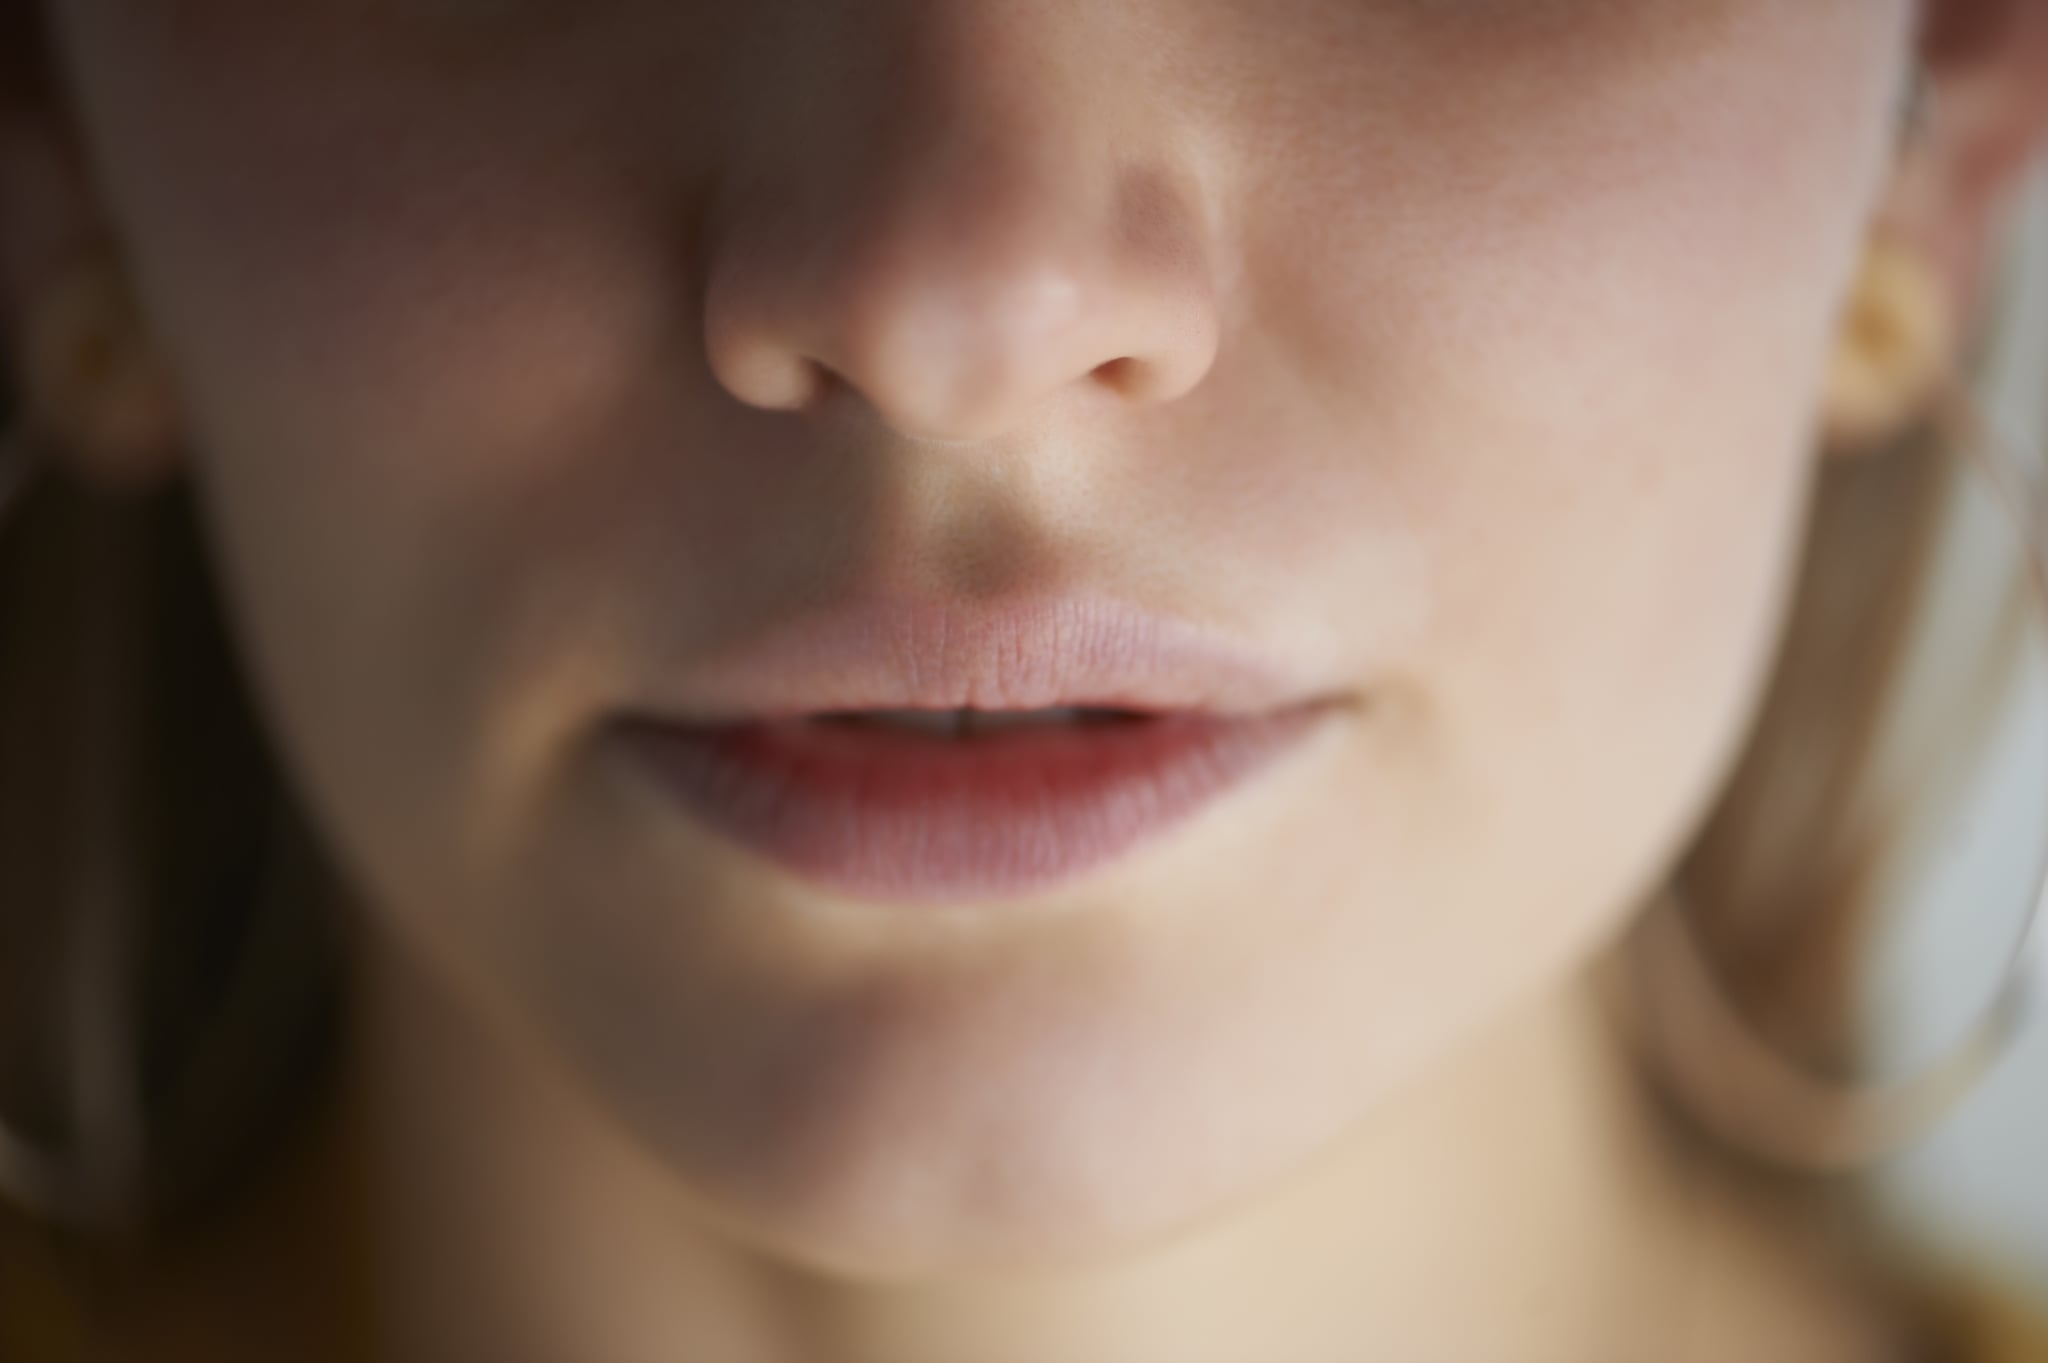 Female face close up focussed on mouth and nose in daylight studio.